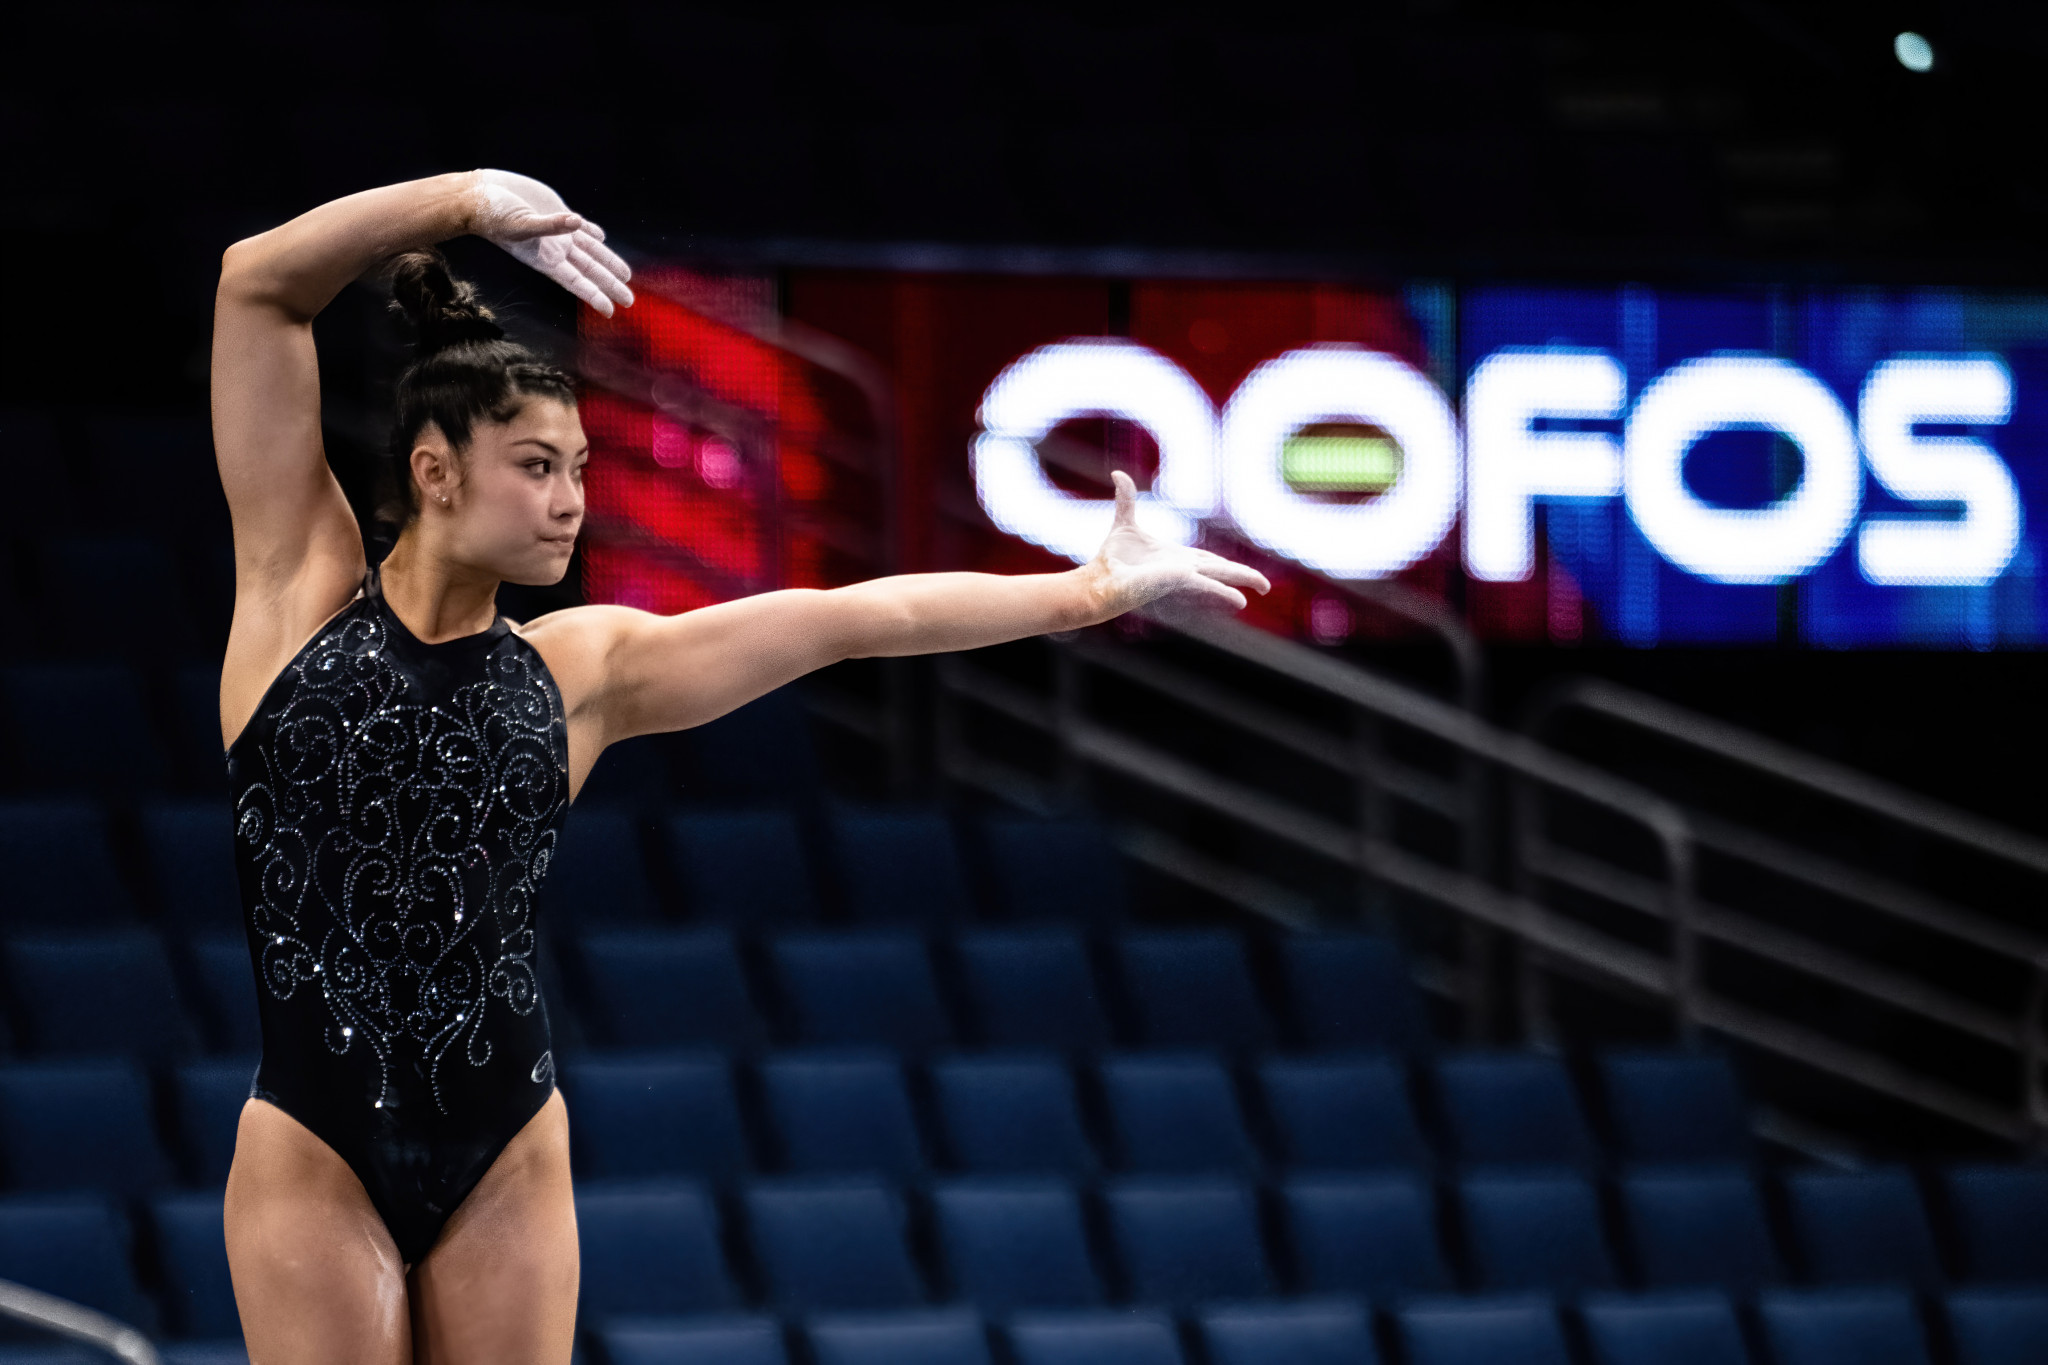 Kayla DiCello takes part in women's podium training at the Championships ©USA Gymnastics